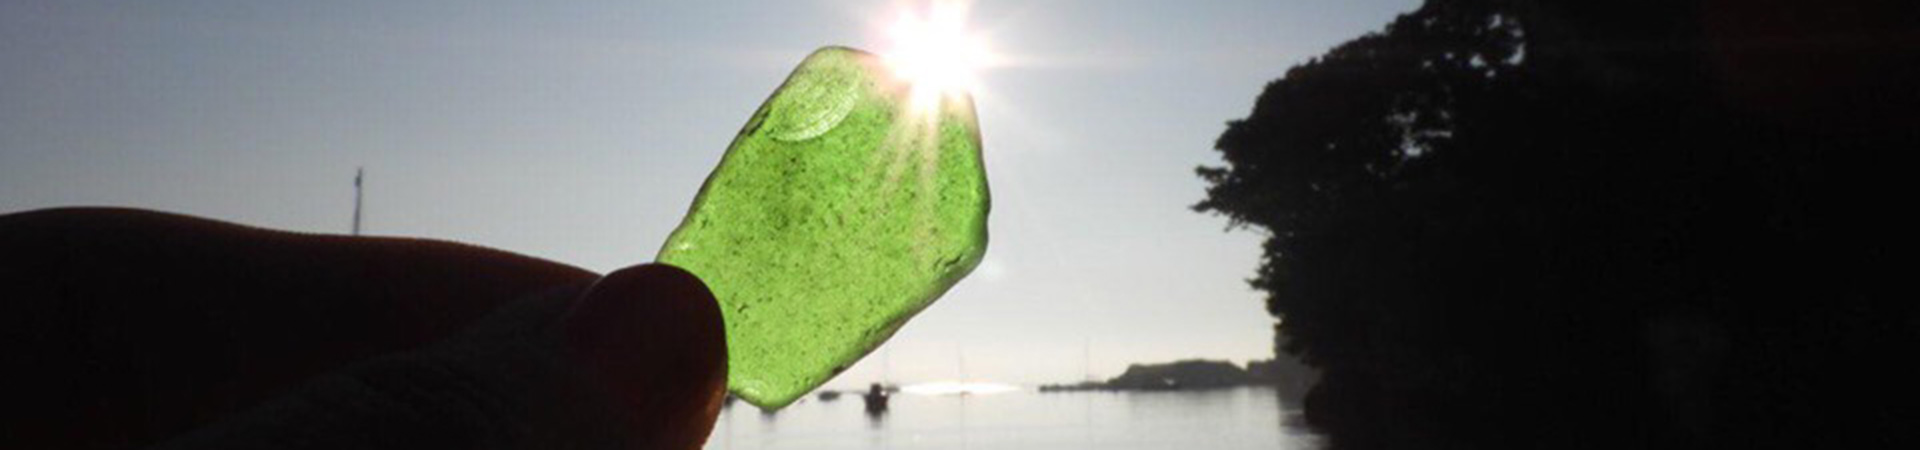 Searching for sea glass with Pebbletastic